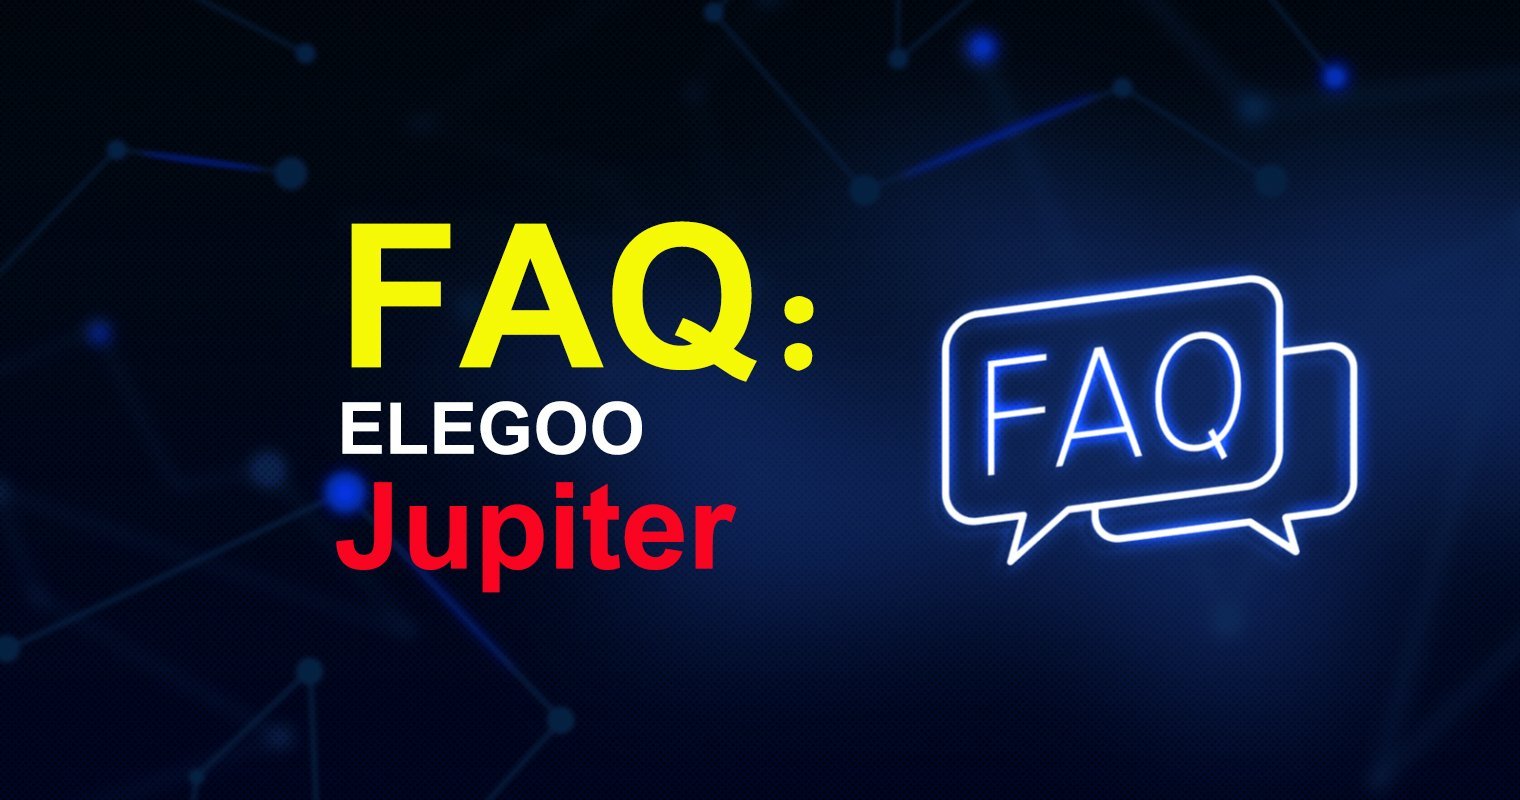 ELEGOO Jupiter: Frequently Asked Questions